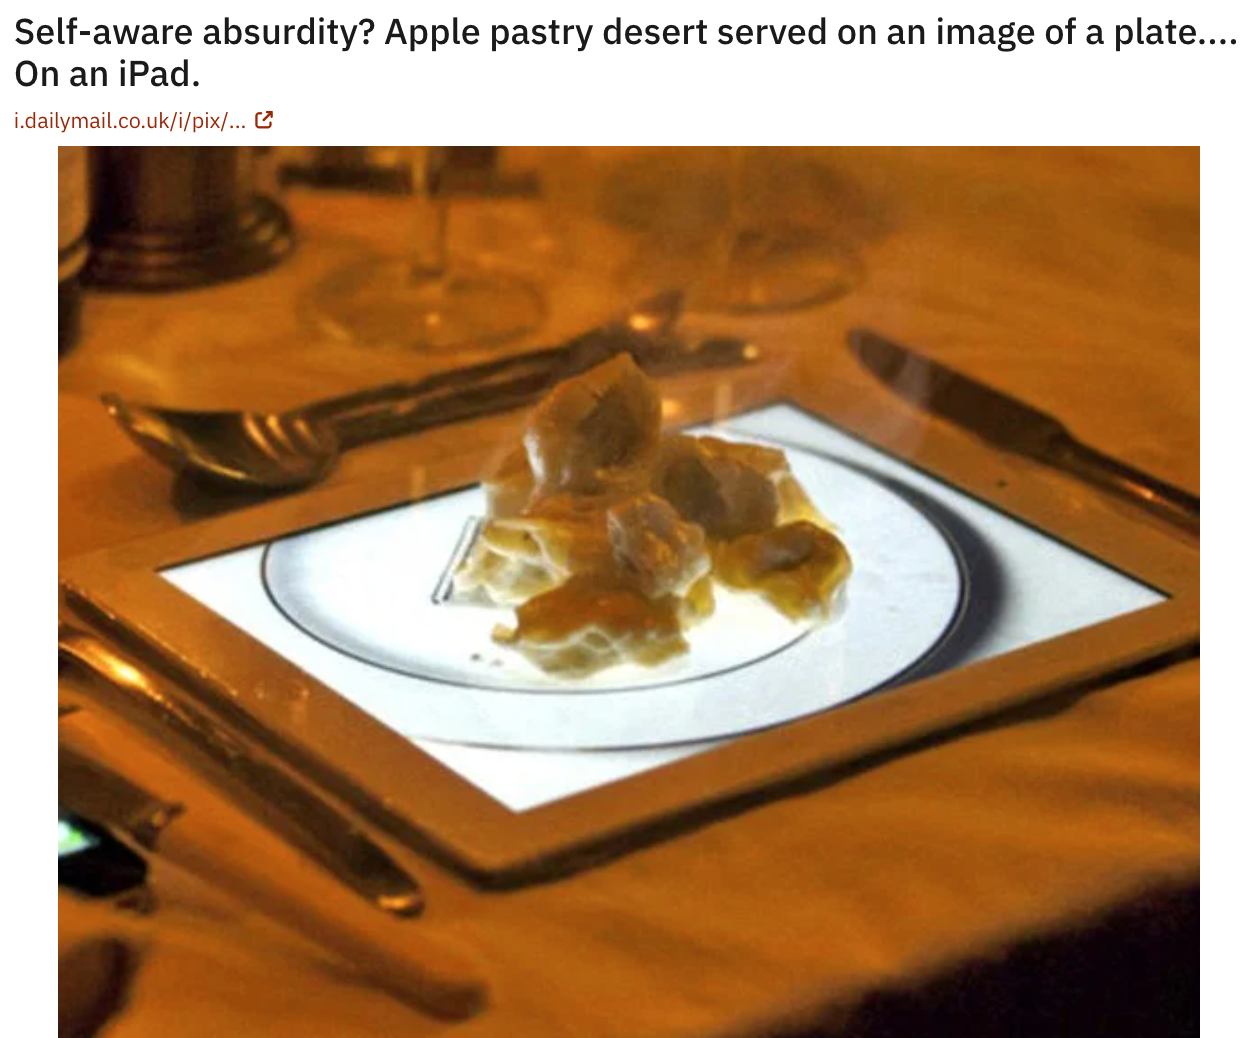 funny food pics - Selfaware absurdity? Apple pastry desert served on an image of a plate.... On an iPad.